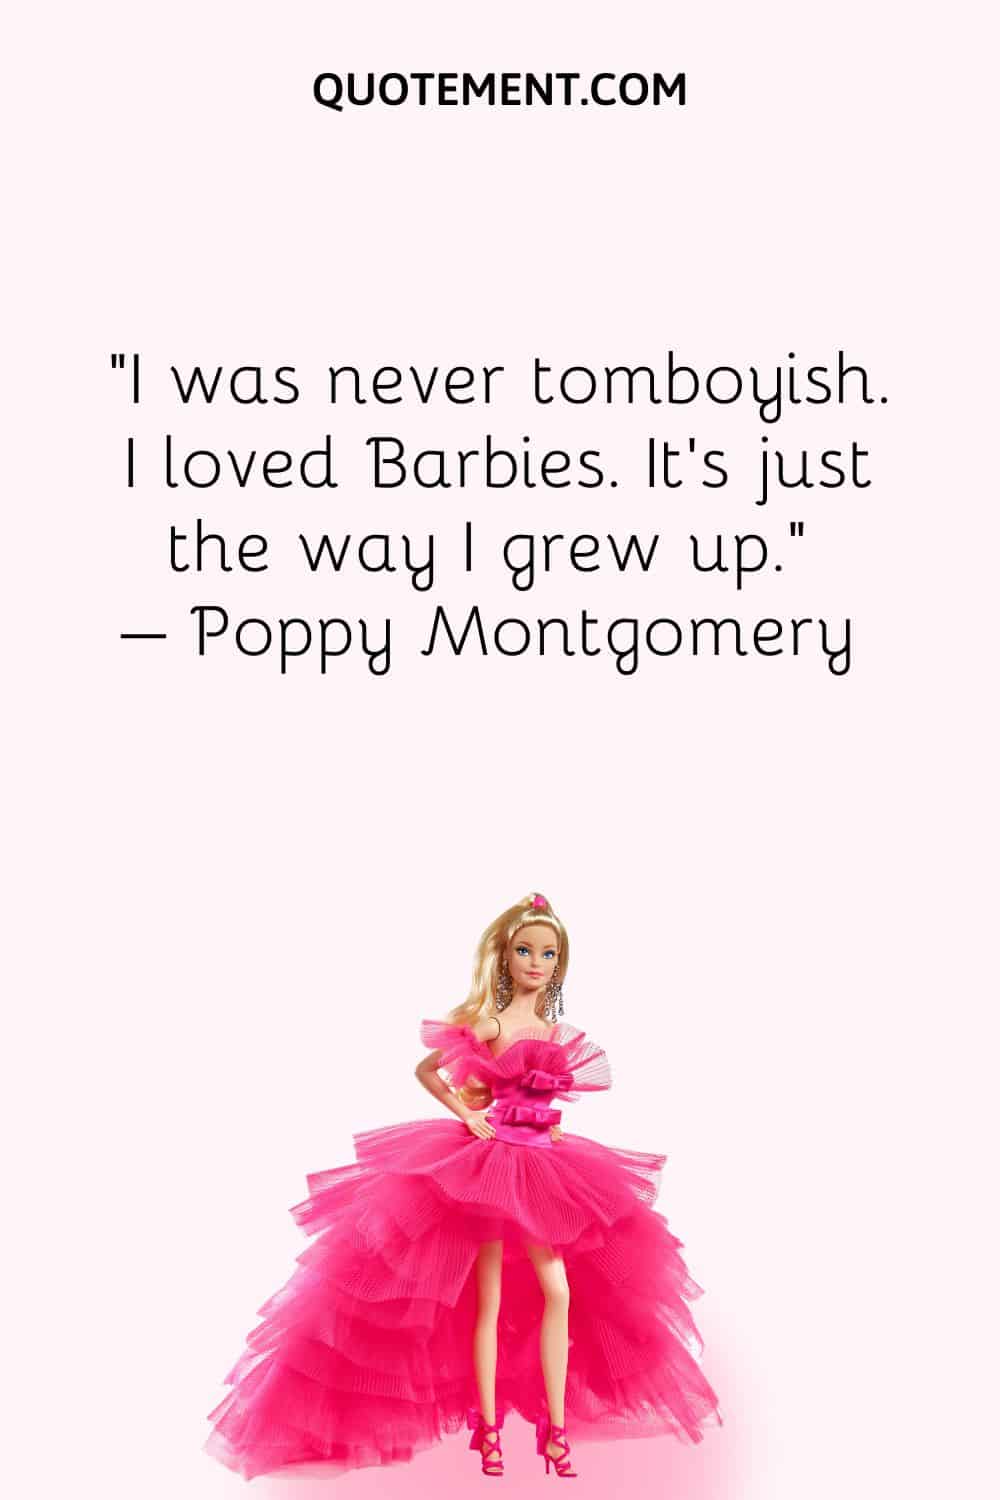 I was never tomboyish. I loved Barbies. It's just the way I grew up